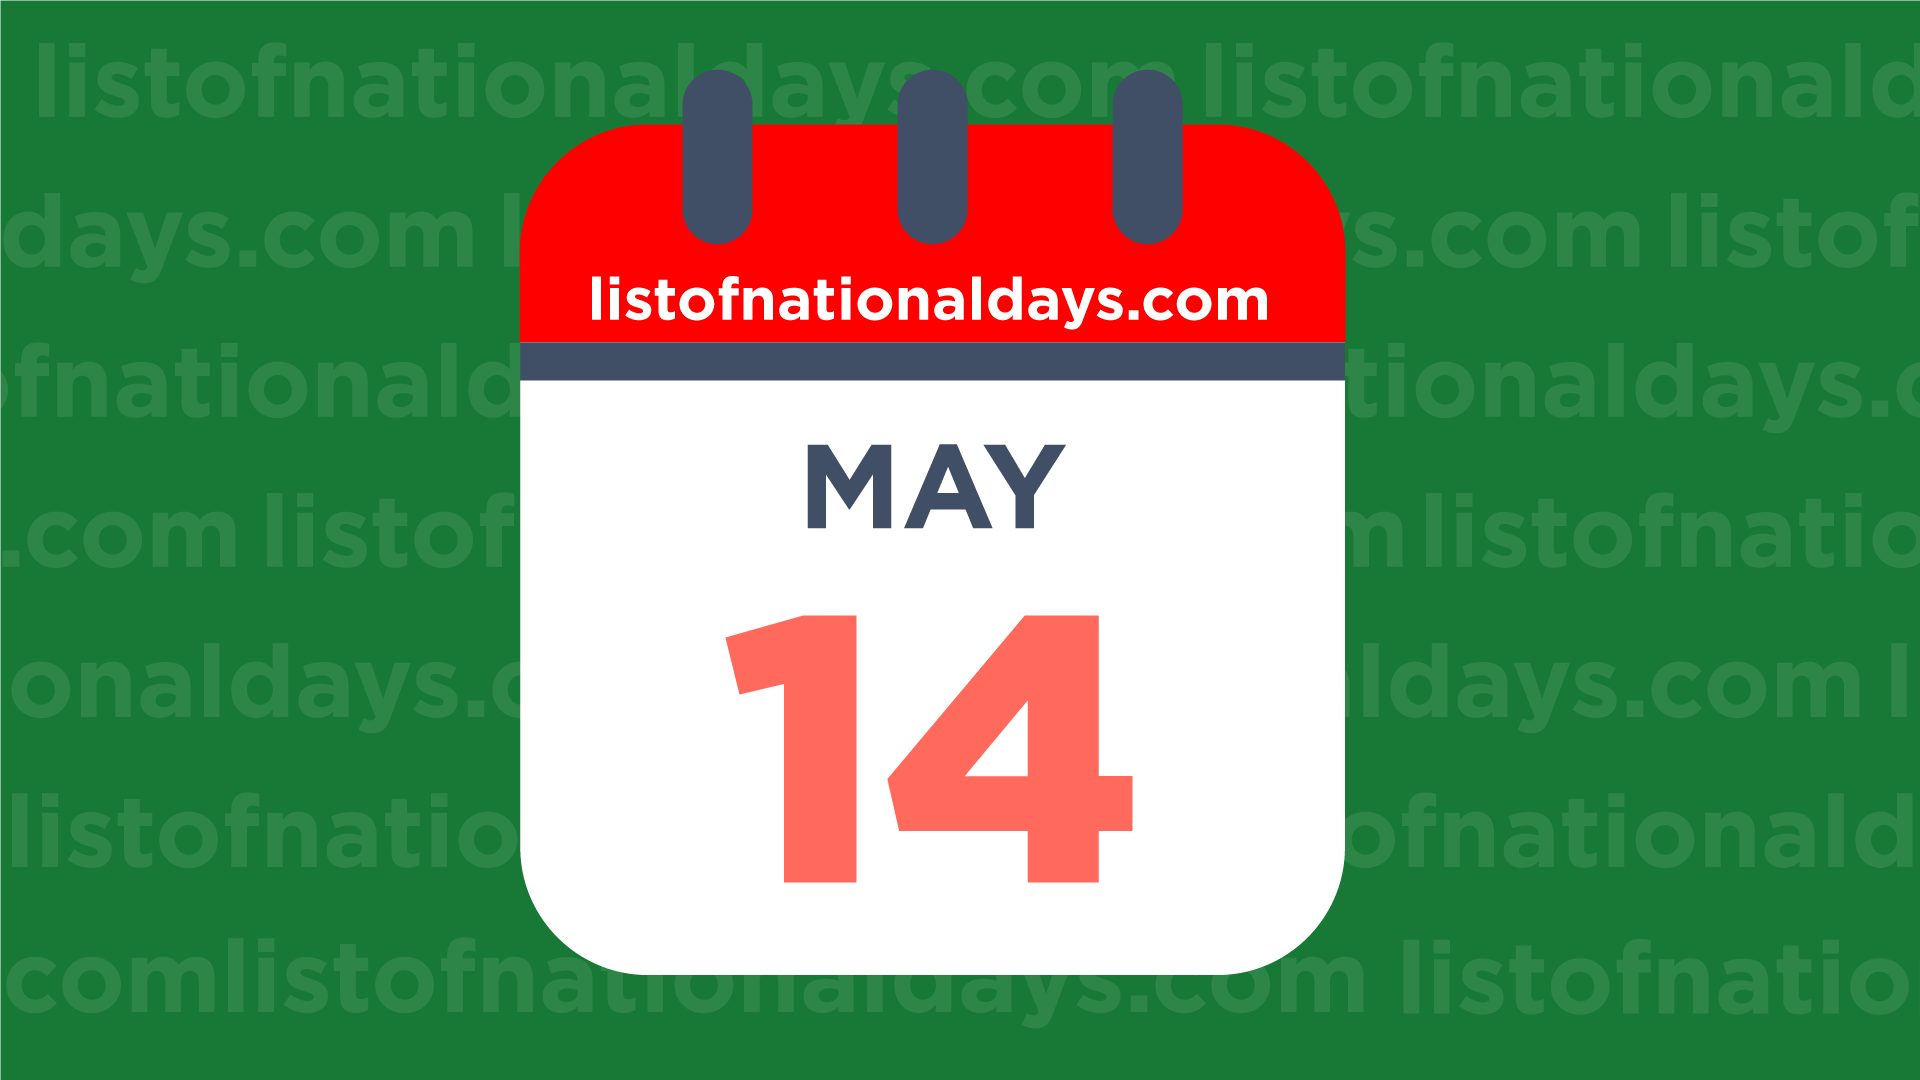 MAY 14TH National Holidays, Observances & Famous Birthdays